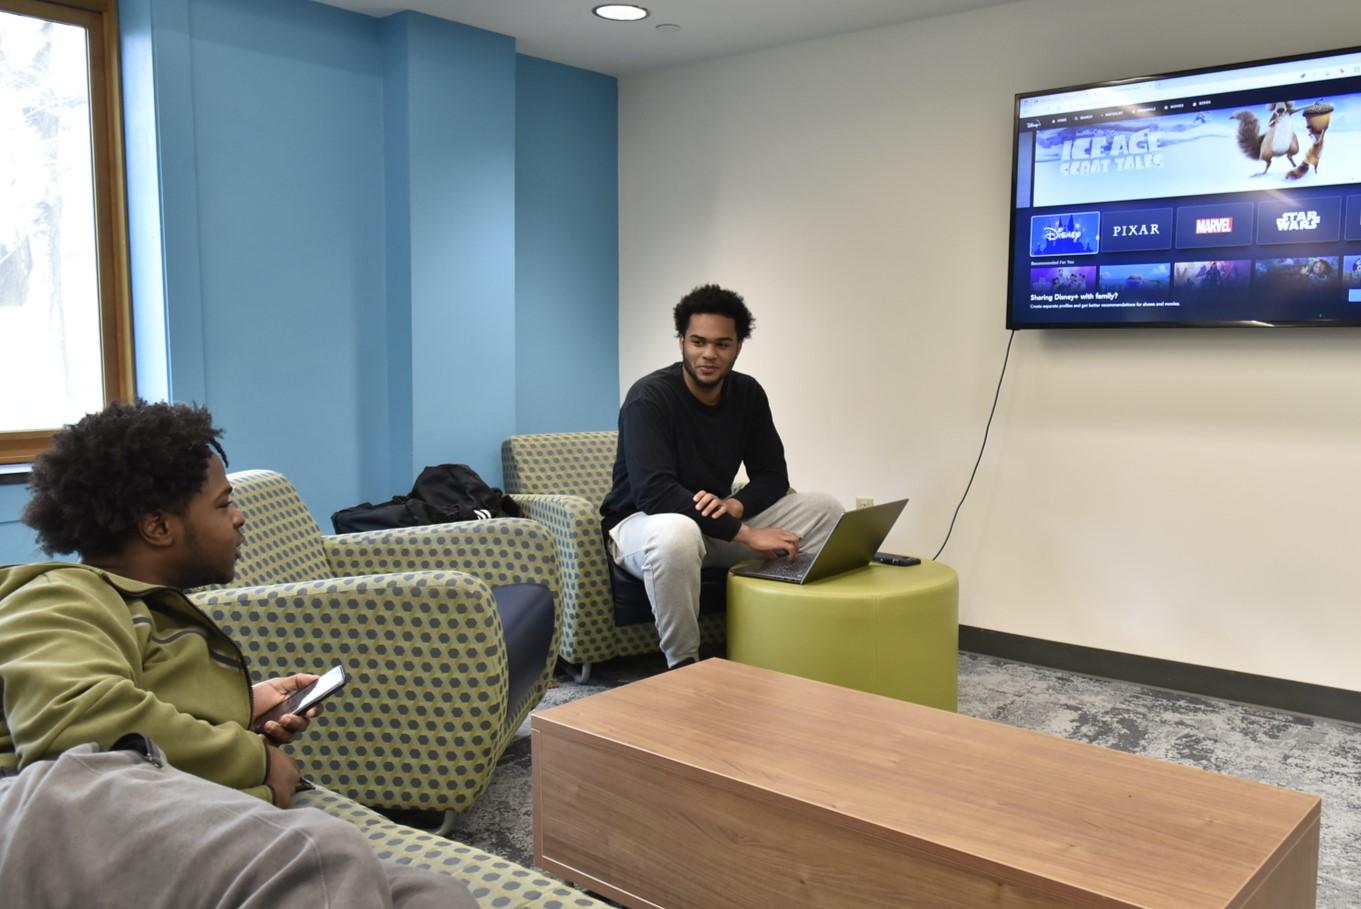 A student has their laptop connected to the TV in Scales Hall's basement lounge, talking to another student and deciding what show to stream.